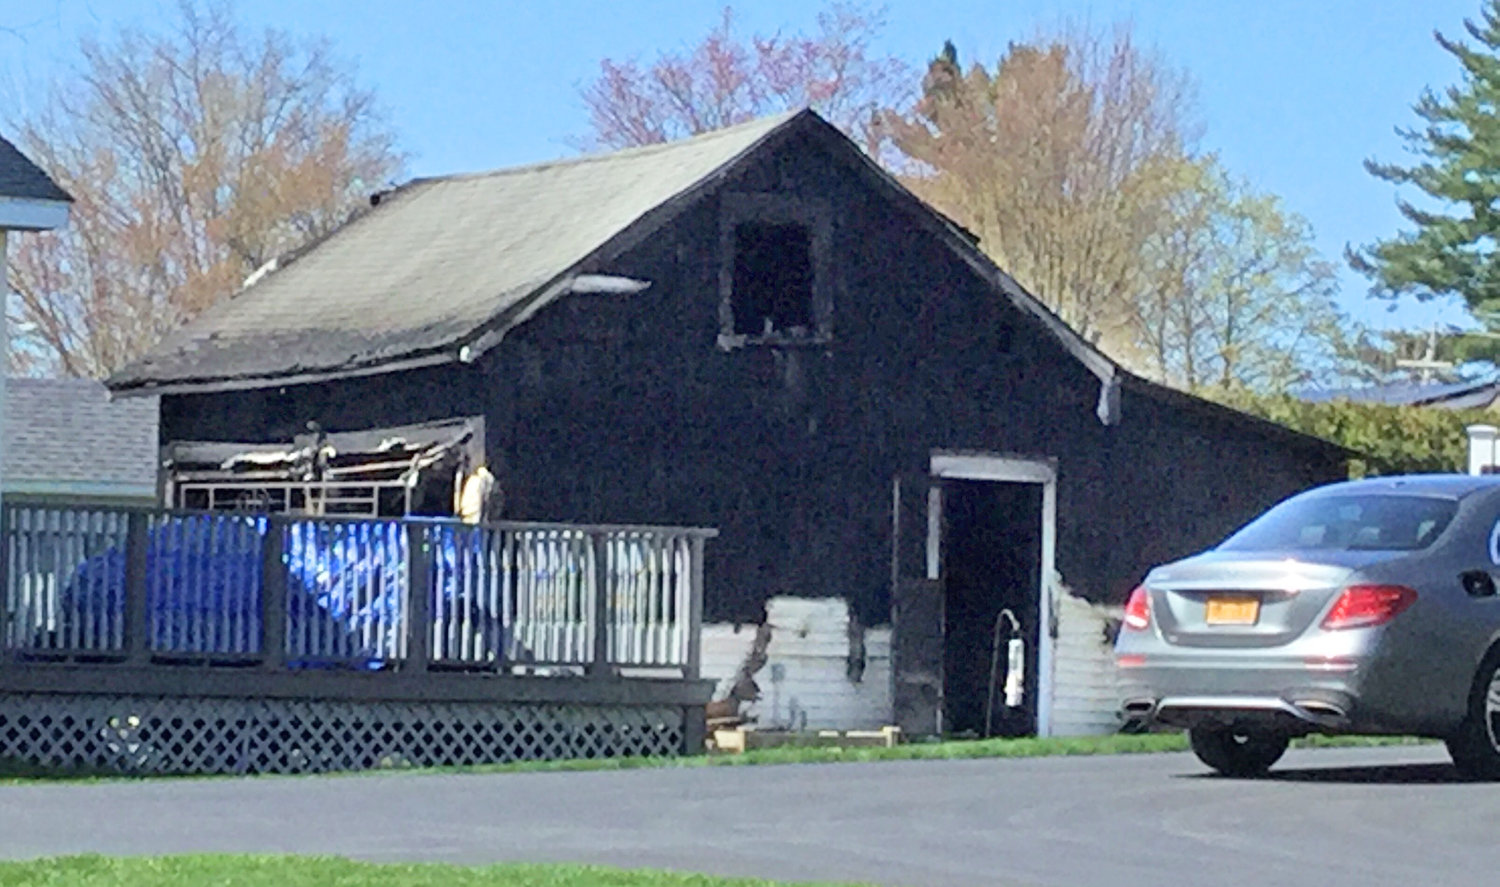 STRUCTURE FIRE — Fire destroyed this storage garage on Walnut Street in Rome Thursday afternoon, according to the Rome Fire Department. No people were injured in the fire. The cause of the fire remains under investigation, officials said.